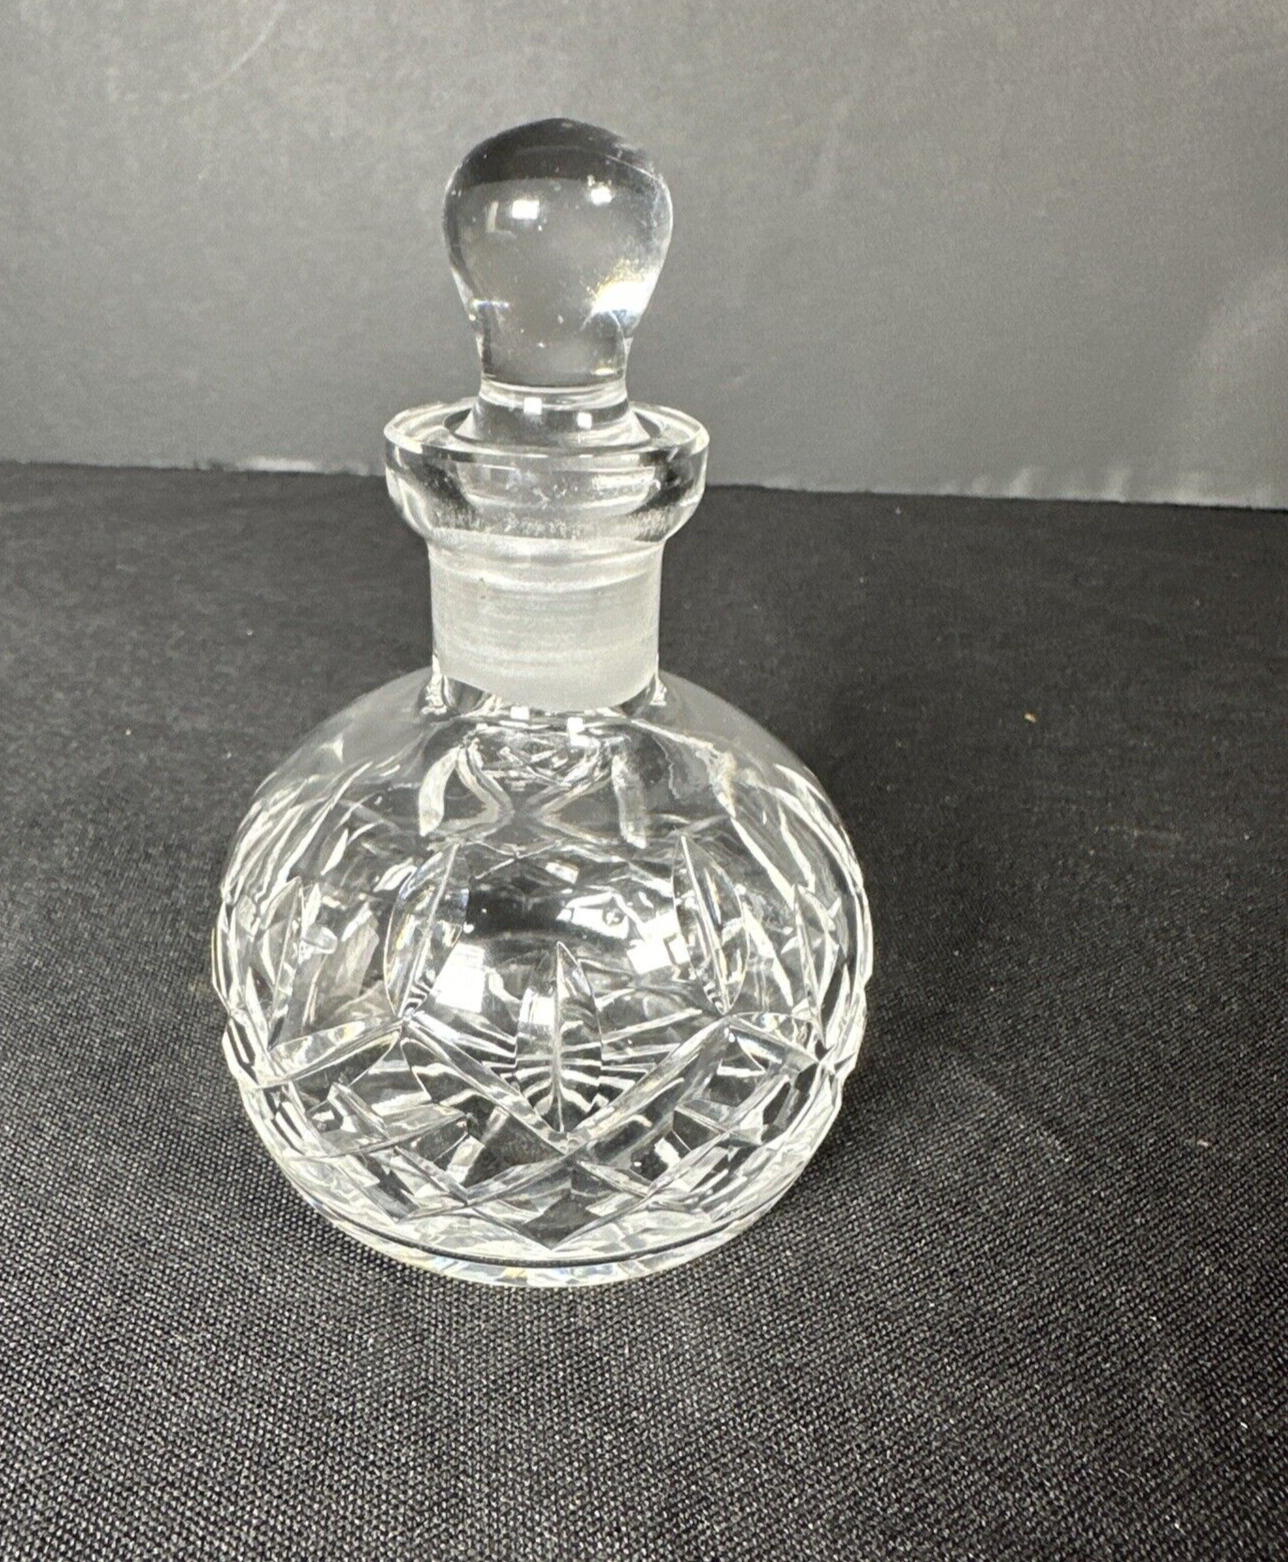 Waterford Crystal LISMORE Round Perfume Bottle with Stopper - 4 1/4